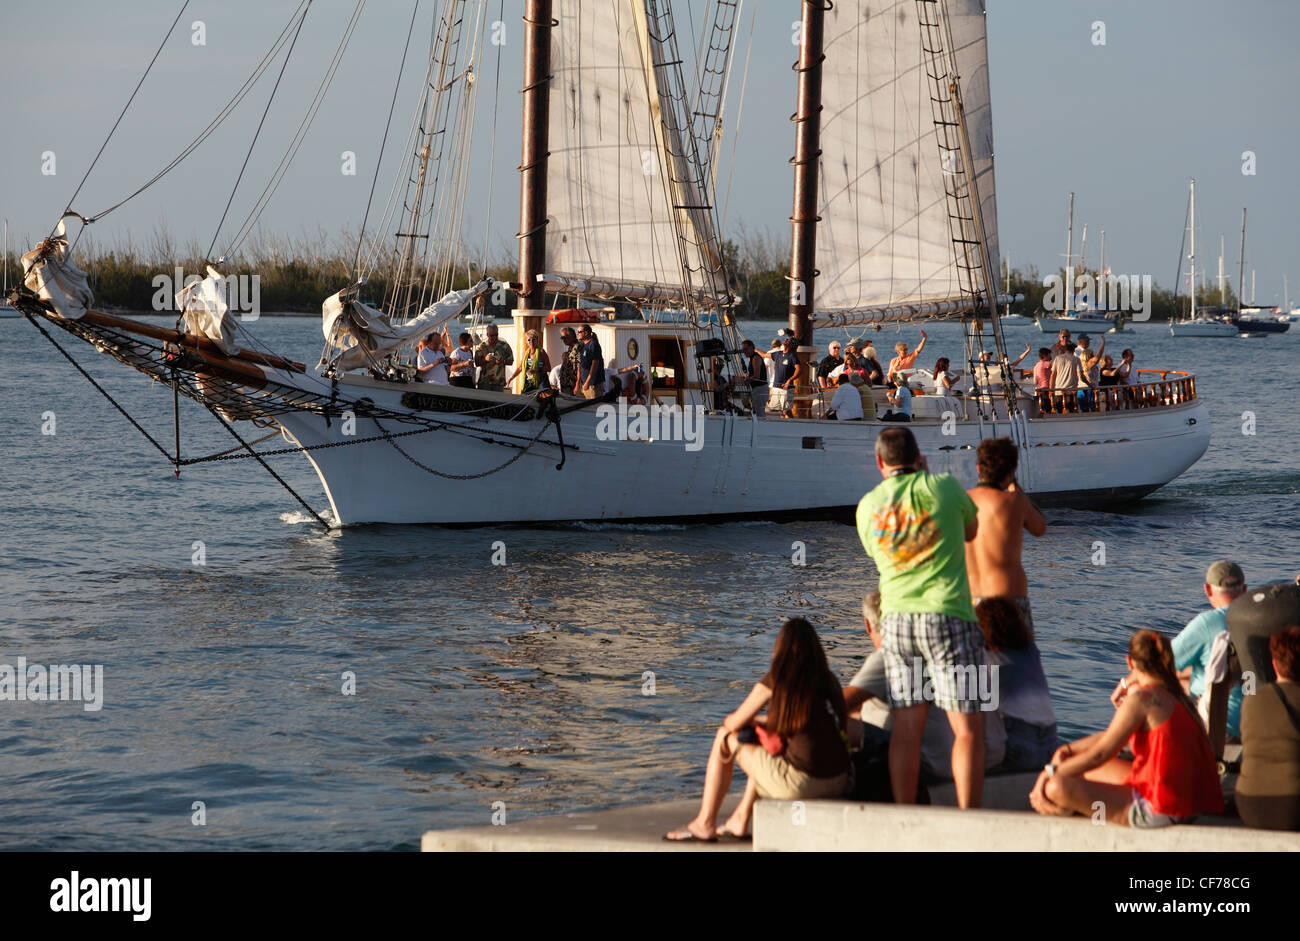 A sunset cruise boat passes people at Mallory Square, Key West, Florida Stock Photo